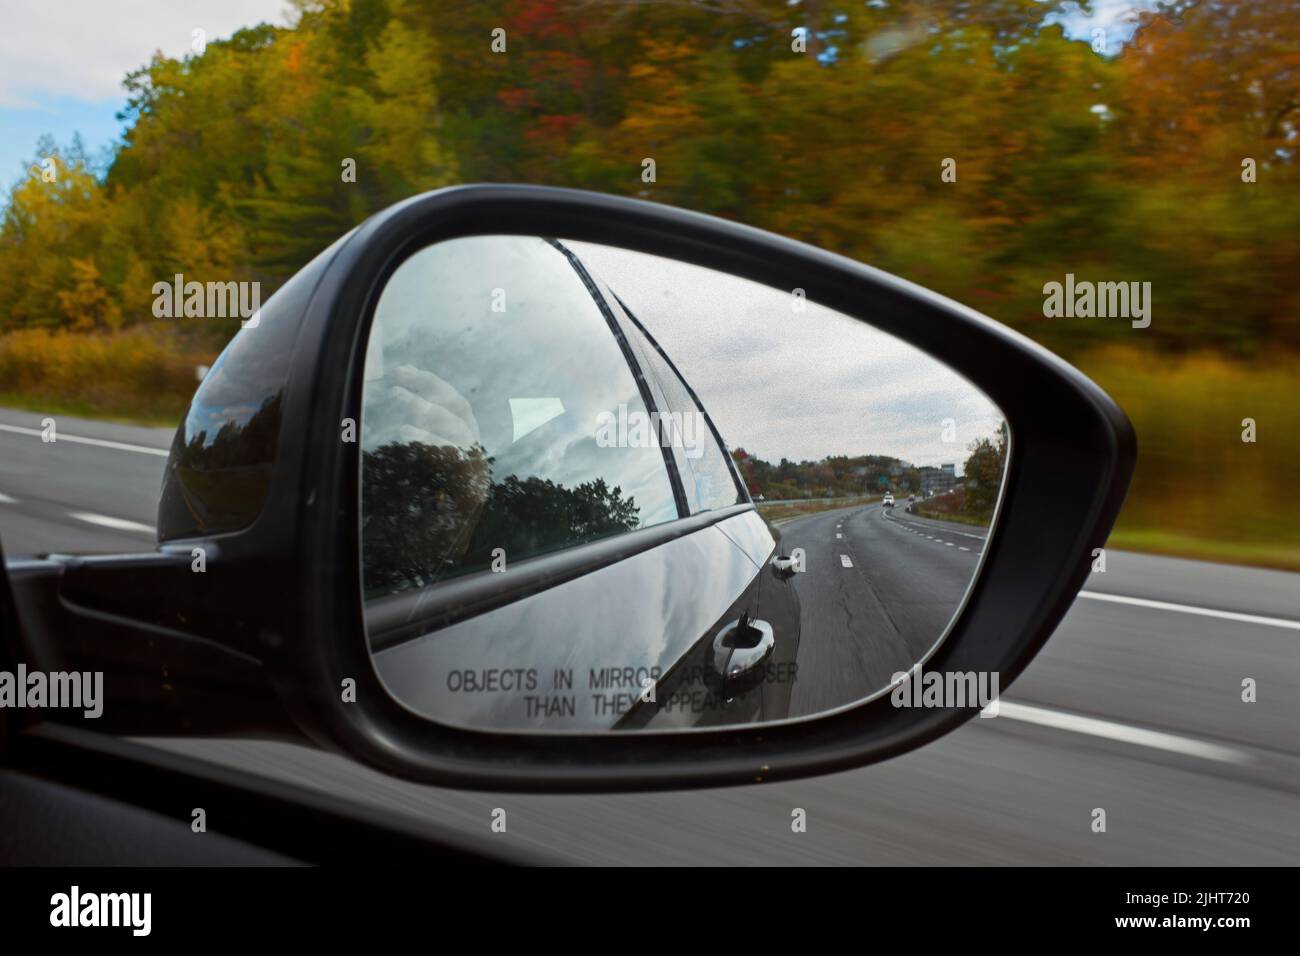 Car Side View Mirror on Passenger Door with view of Highway and Fall Foliage Stock Photo